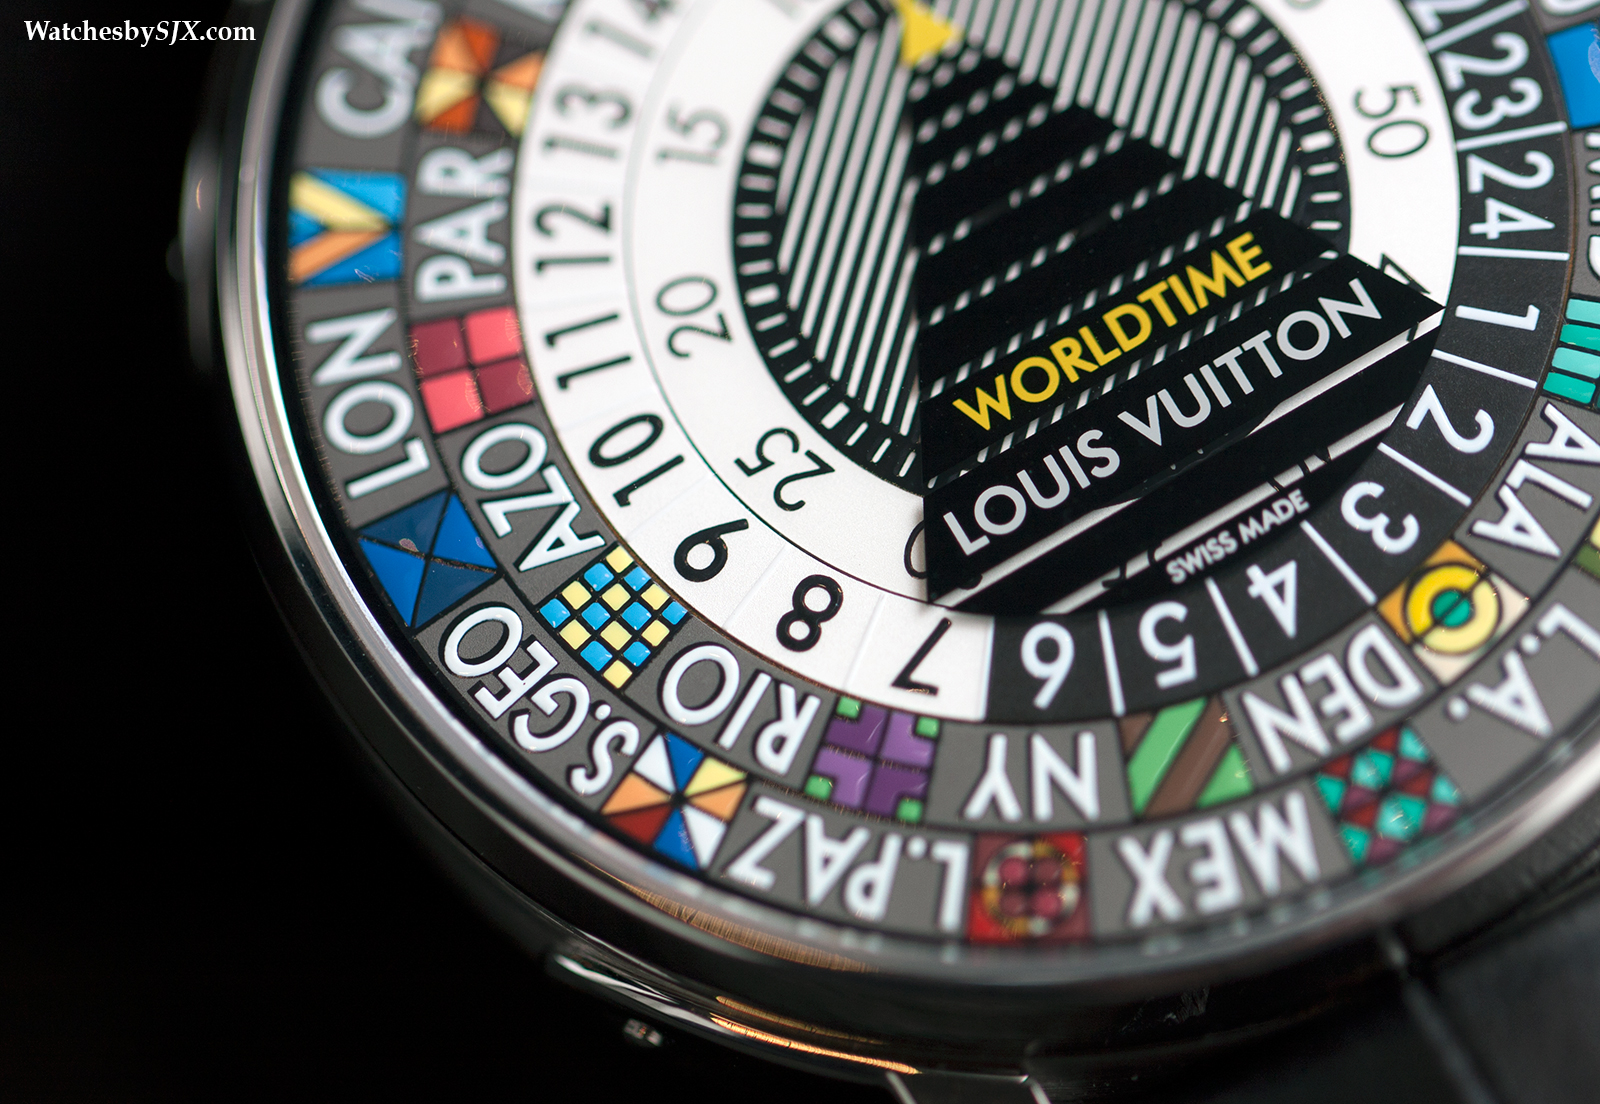 Heraldry, Coats Of Arms, And The Louis Vuitton Escale Worldtime